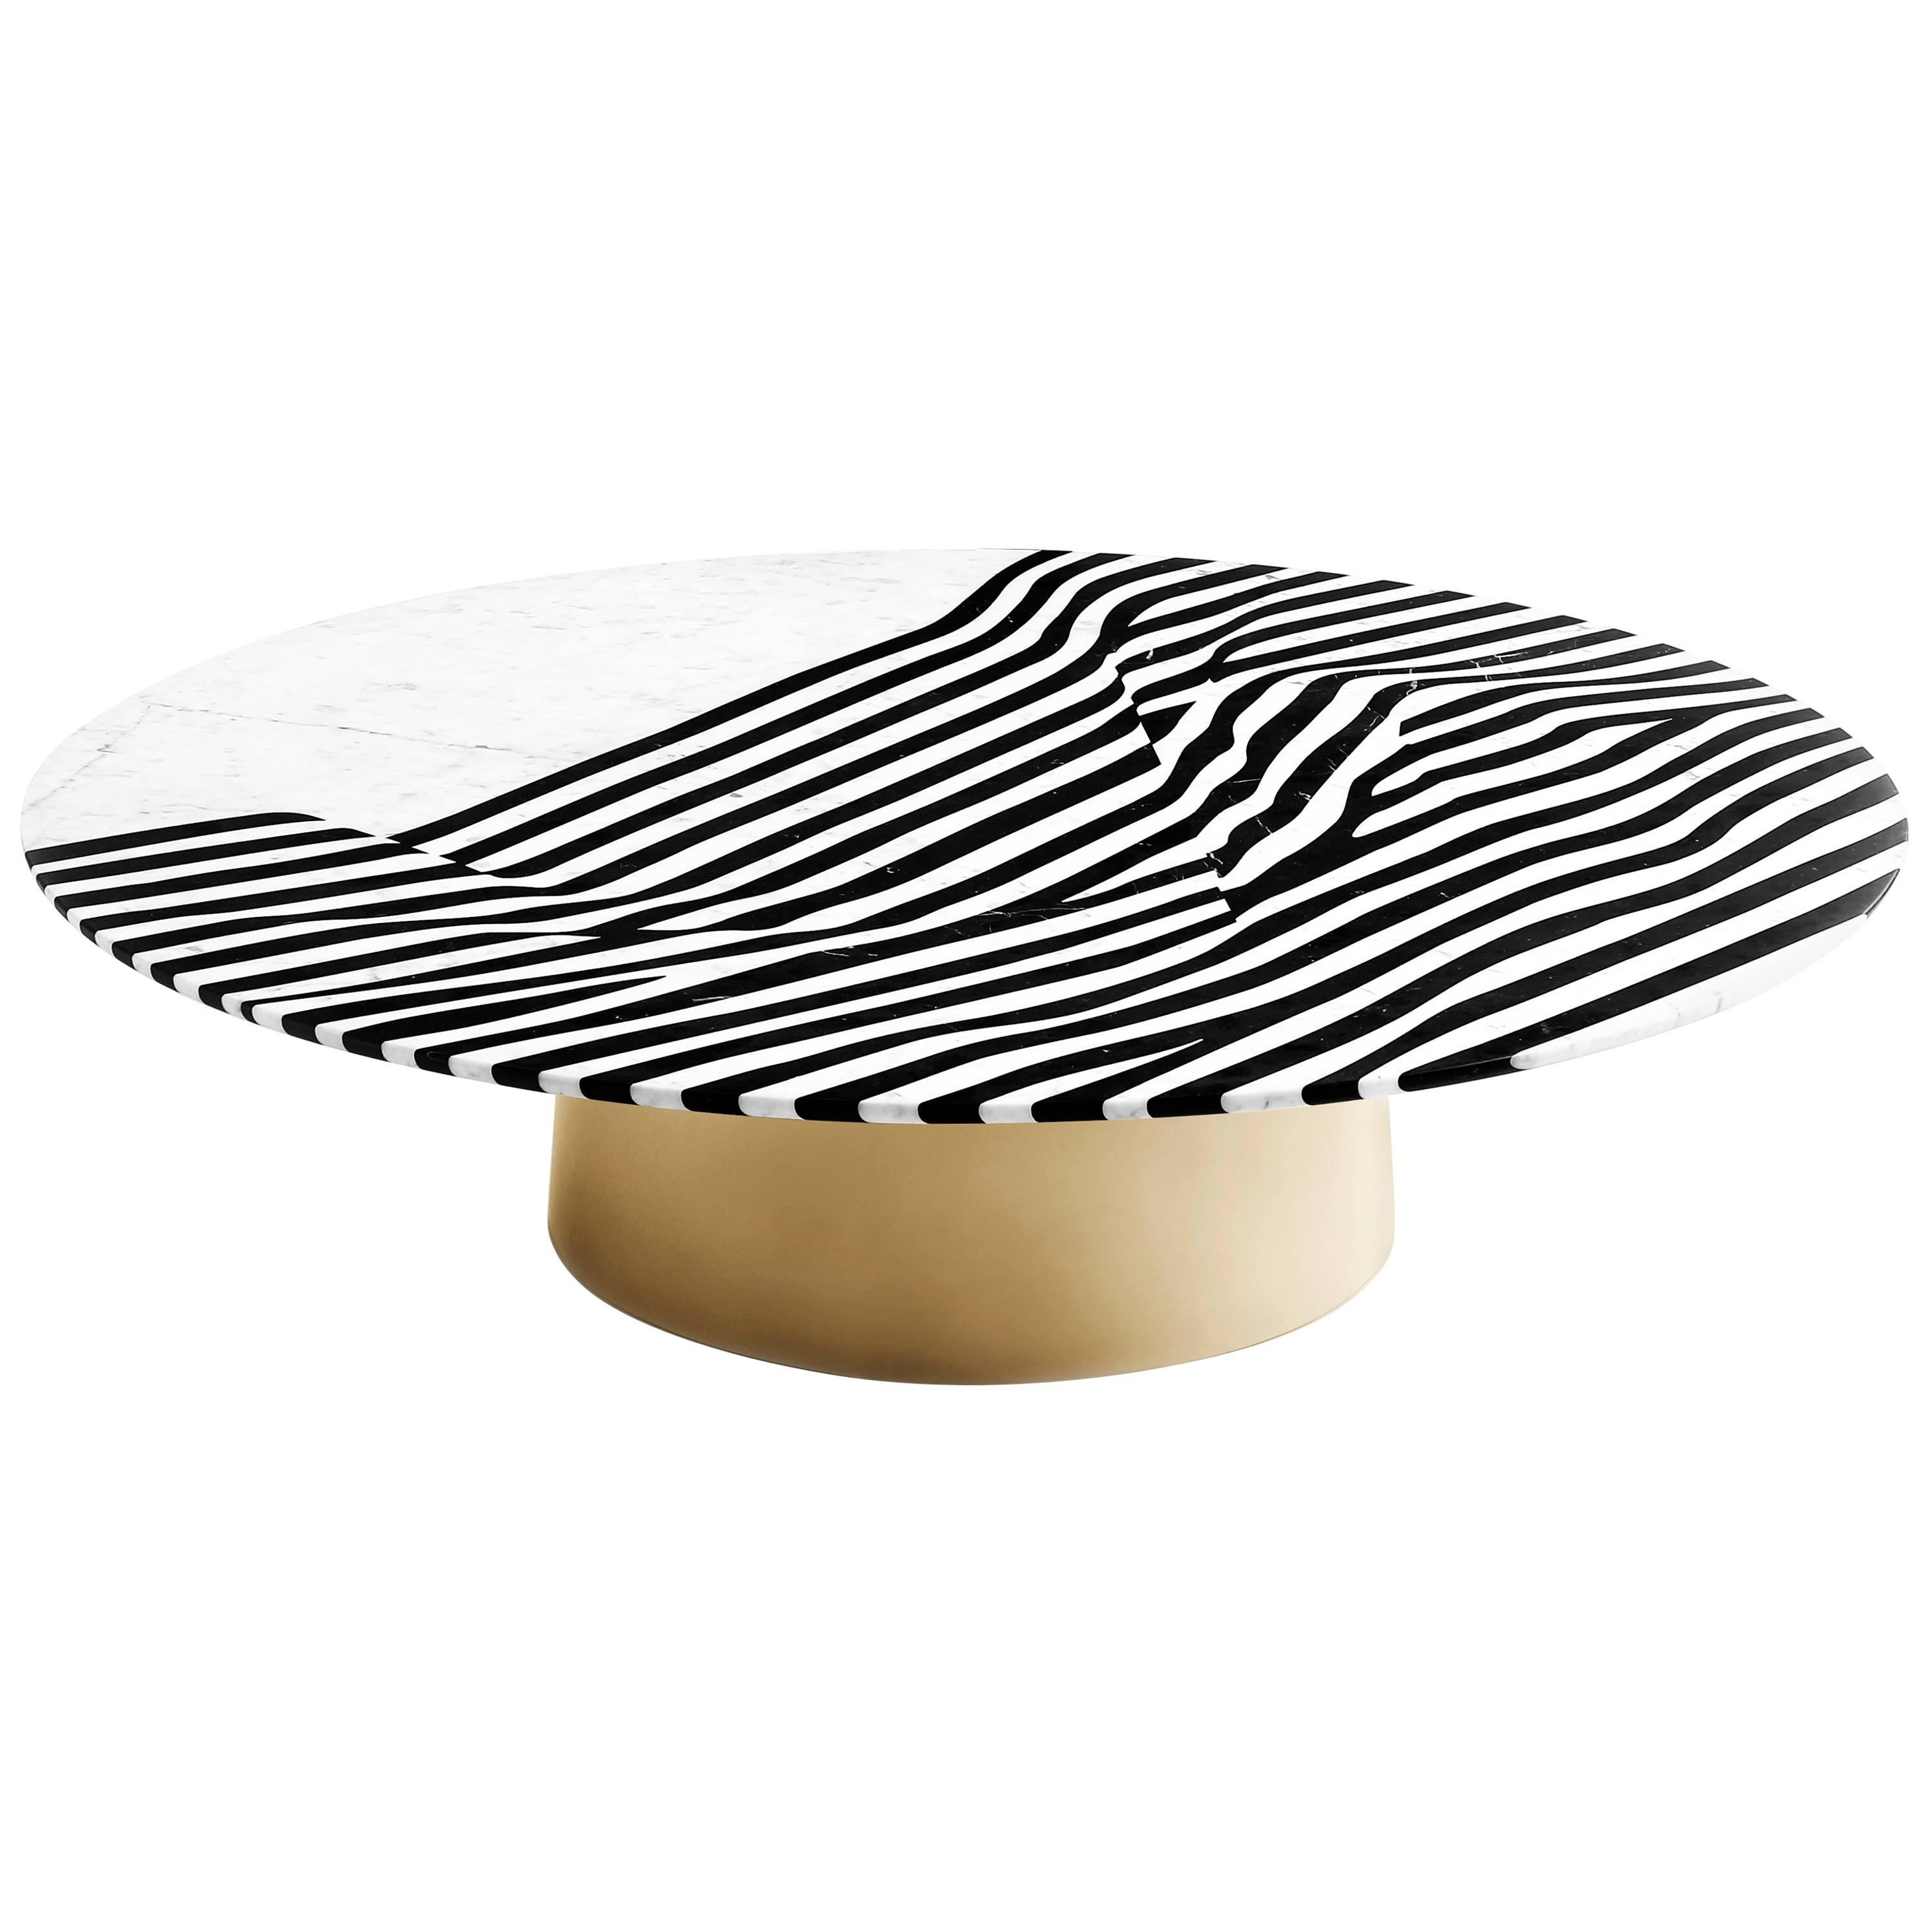 Veiled Coffee Table, Nero Marquinia and Carrara Marble Inlays, Brass Base im Angebot